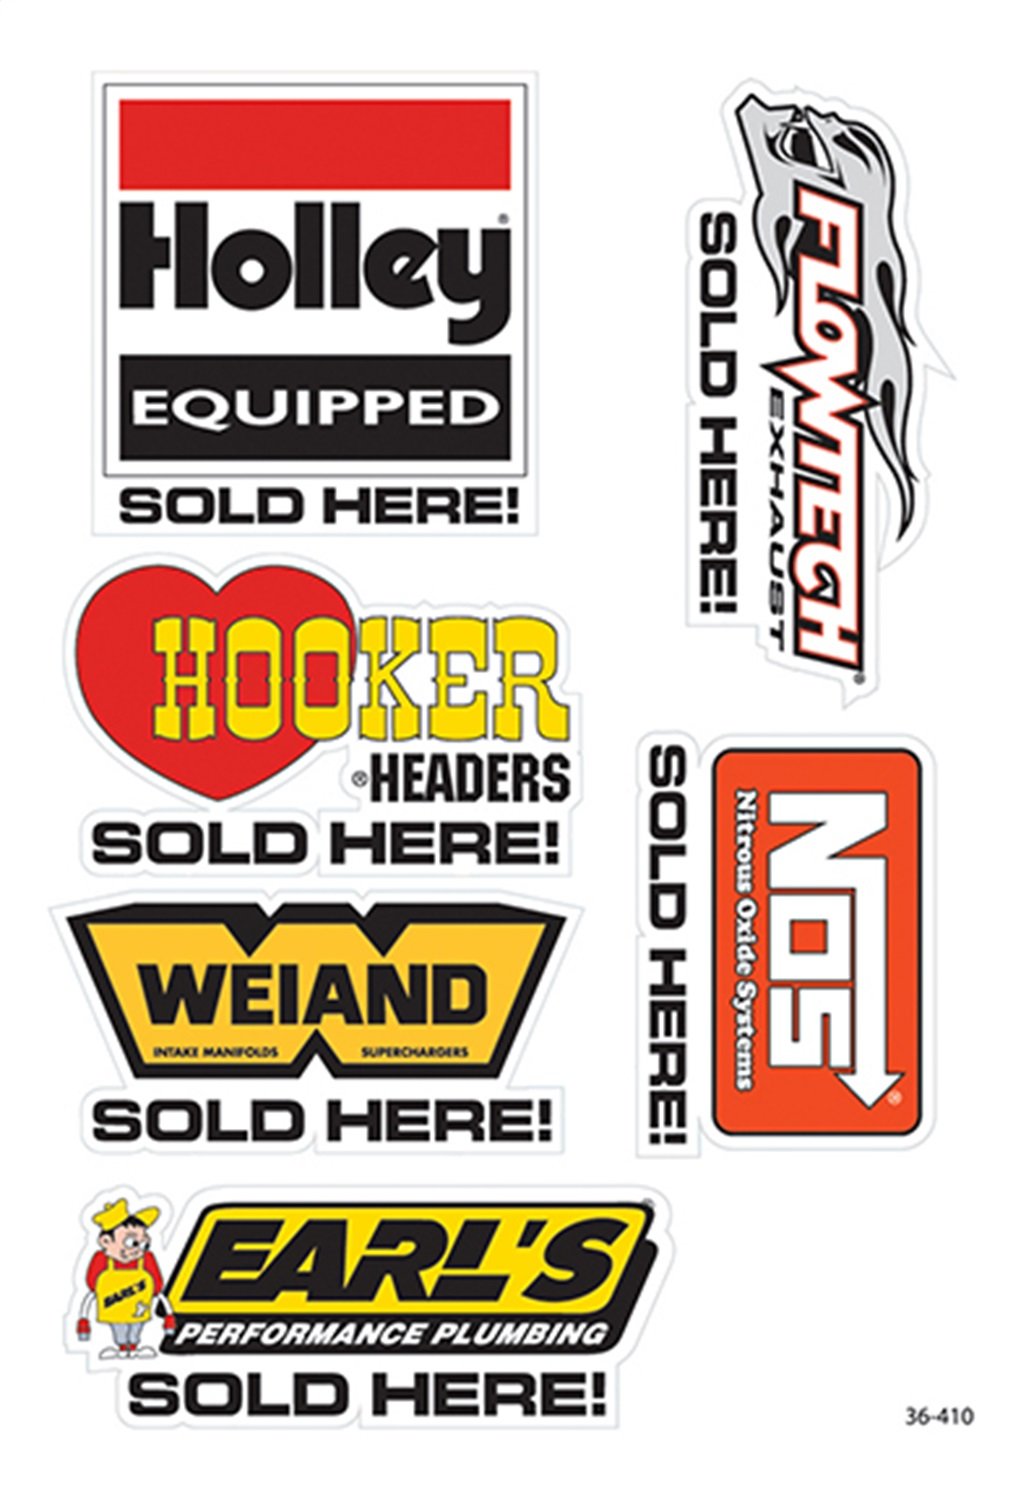 DECAL HOLLEY BRANDS HERE